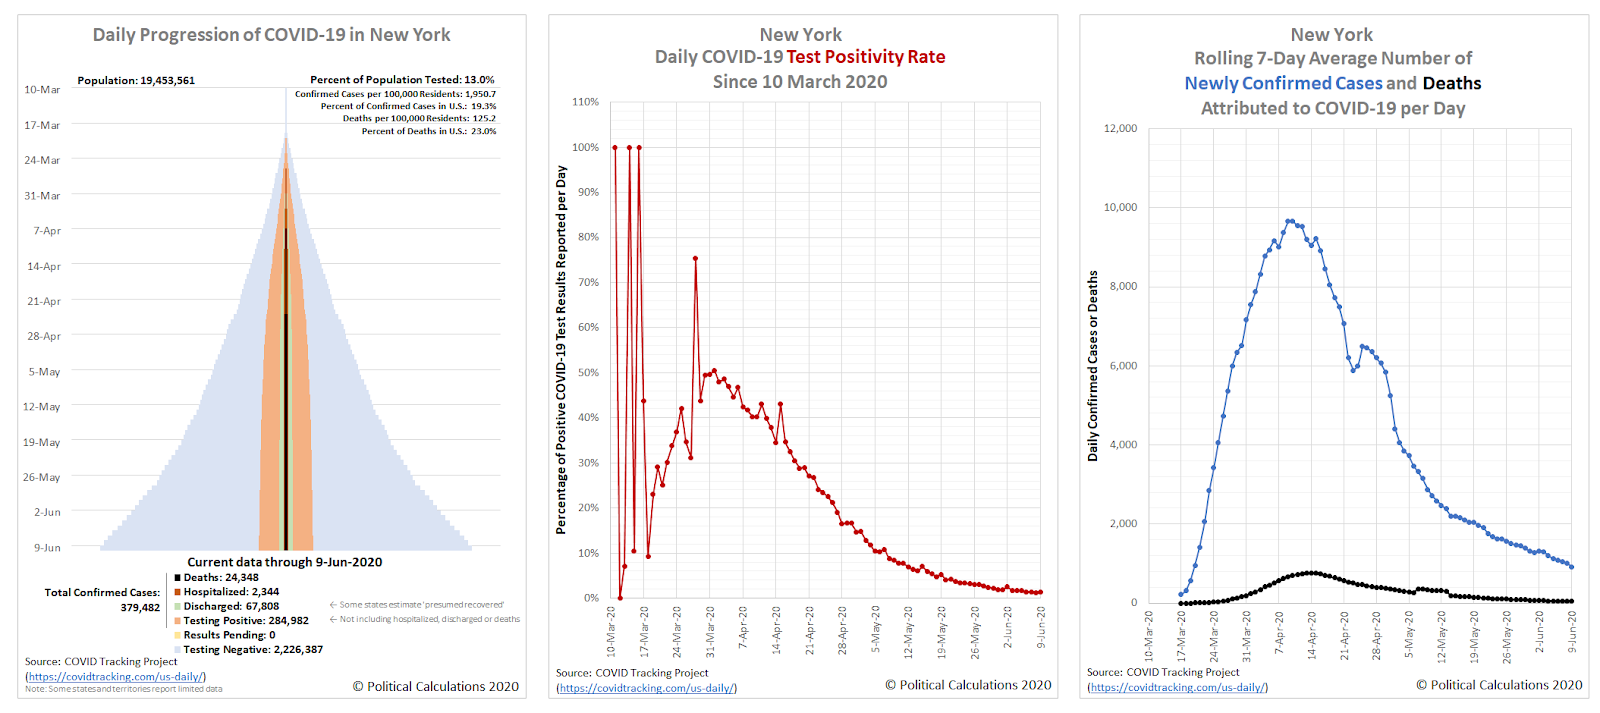 Progression of COVID-19 in New York State, Daily Test Positivity Rate, 7-Day Total Newly Confirmed Cases and Deaths, 10 March 2020 through 9 June 2020